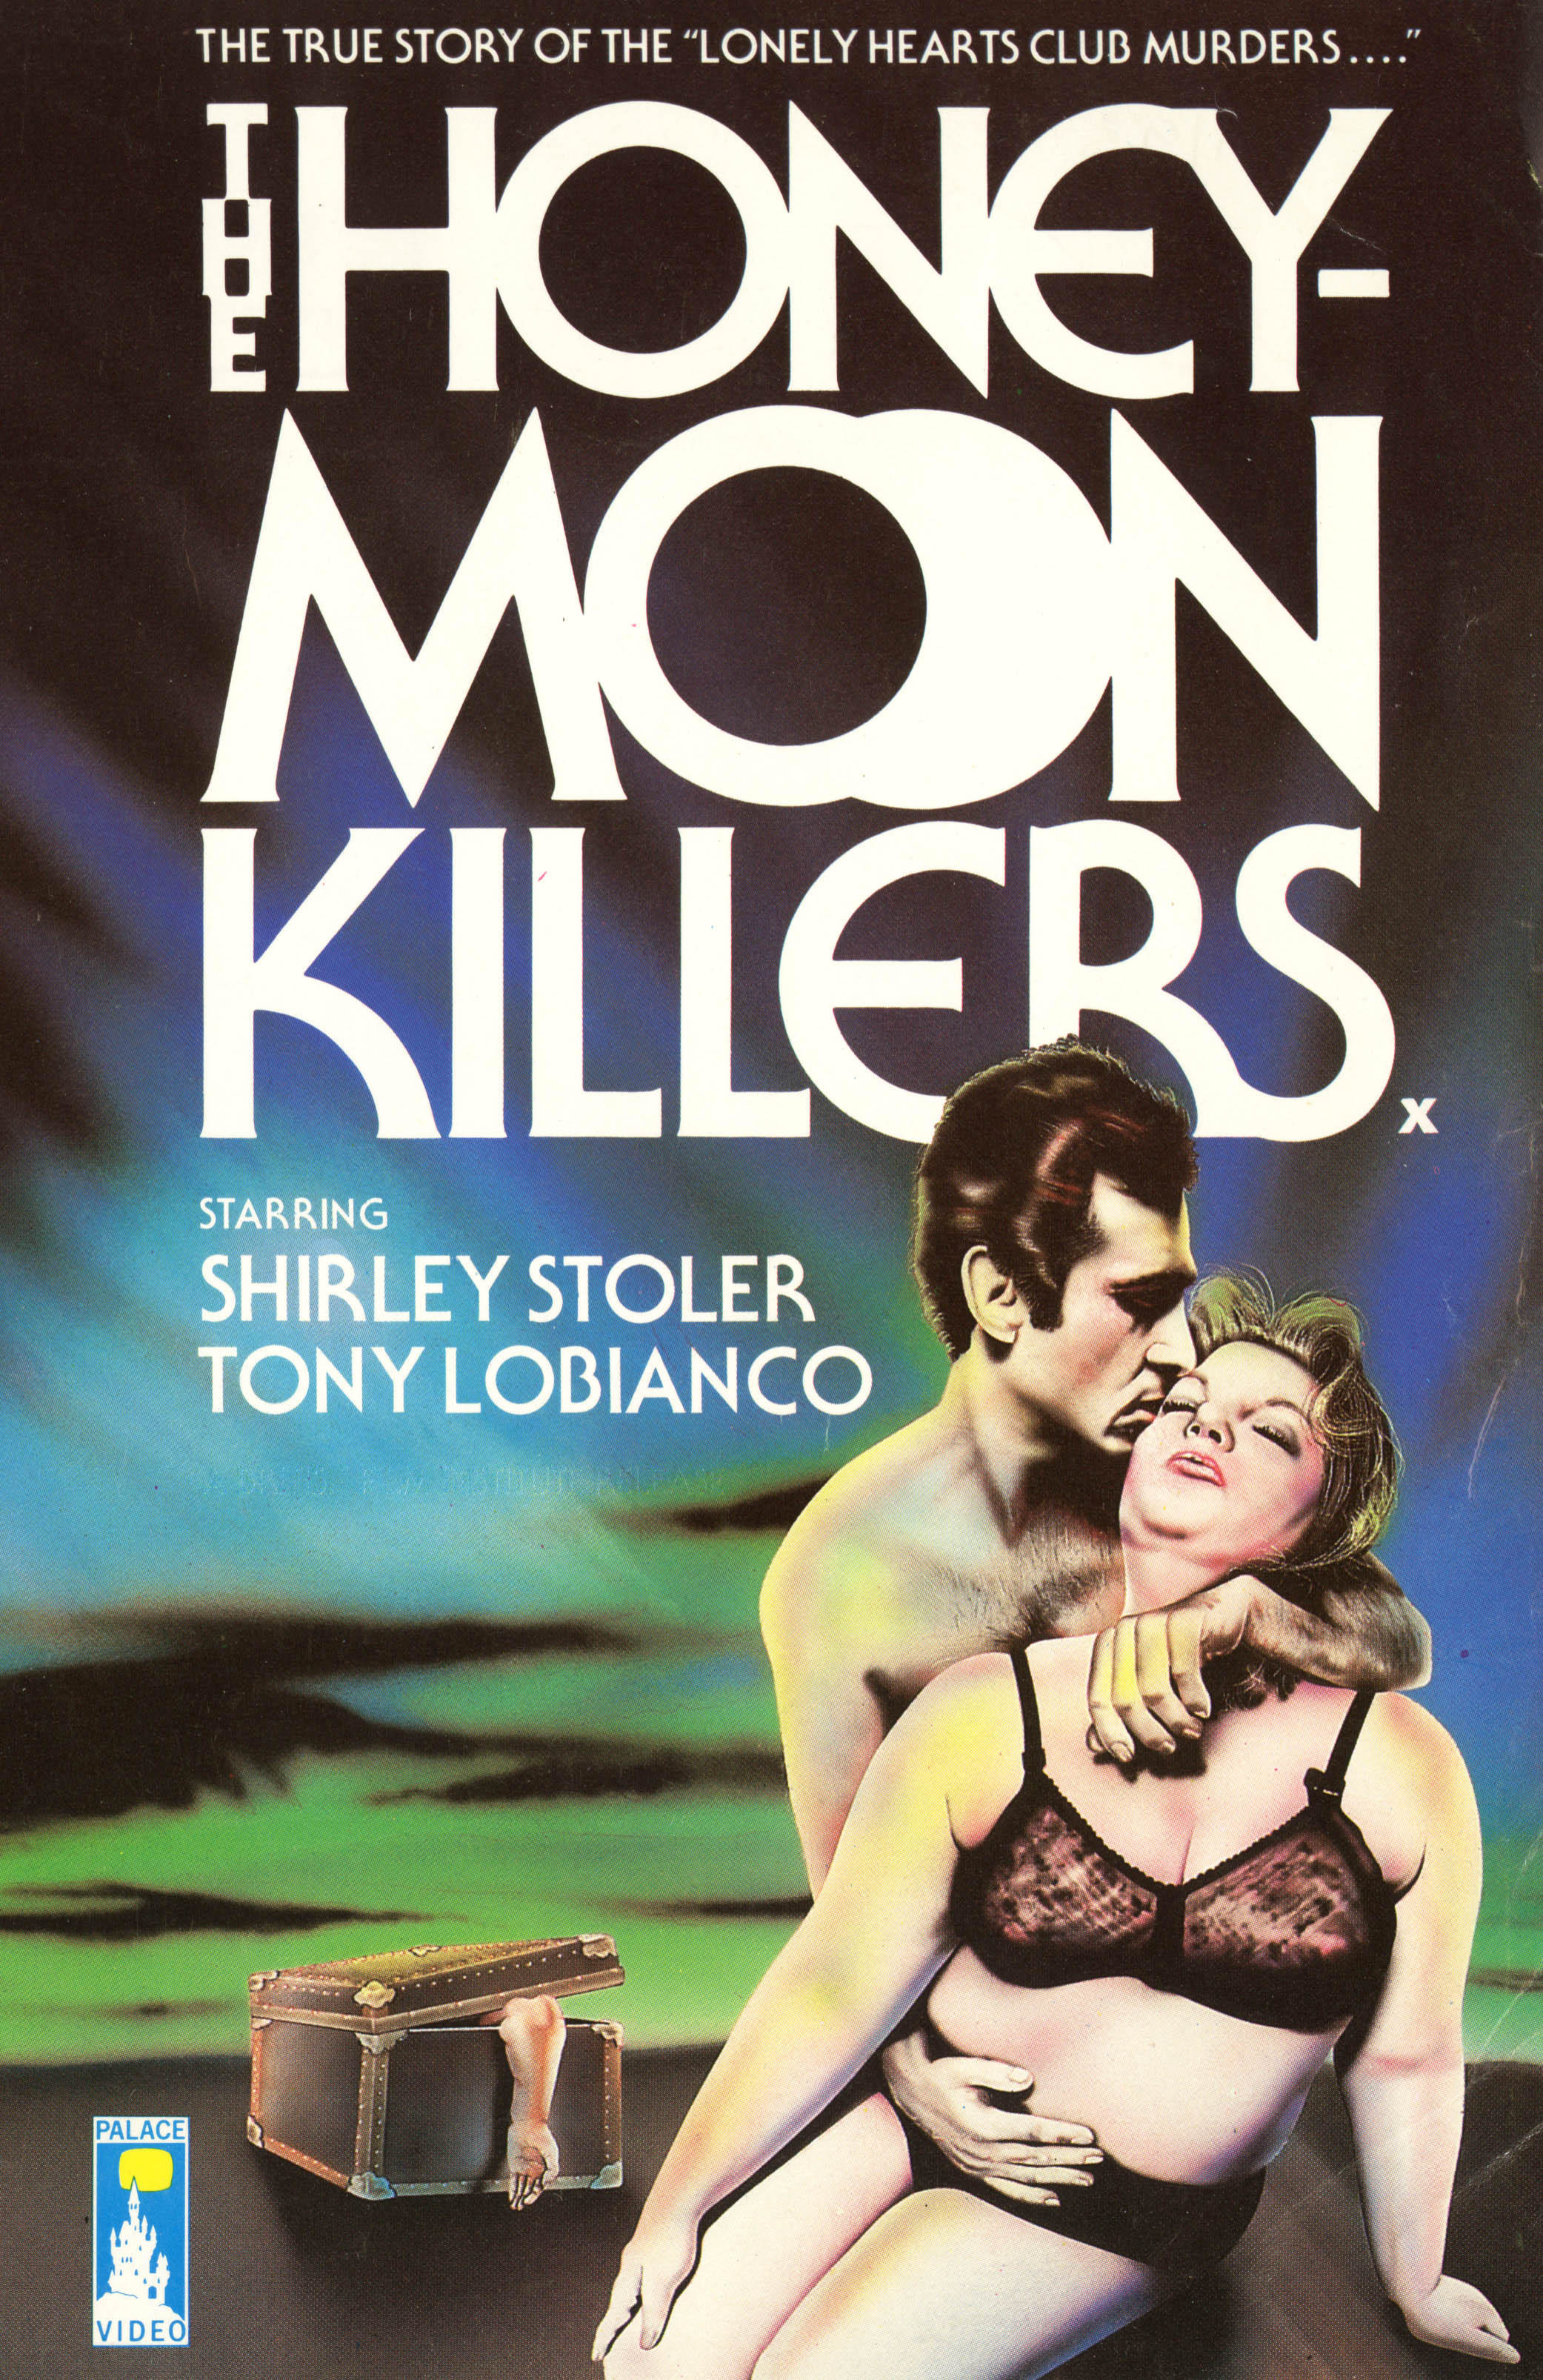 Poster image for the movie &quot;The Honeymoon Killers&quot; with a painting depicting the two lovers embracing; the woman is wearing lingerie and the man is seemingly nude, and there is a box behind them with an arm coming out